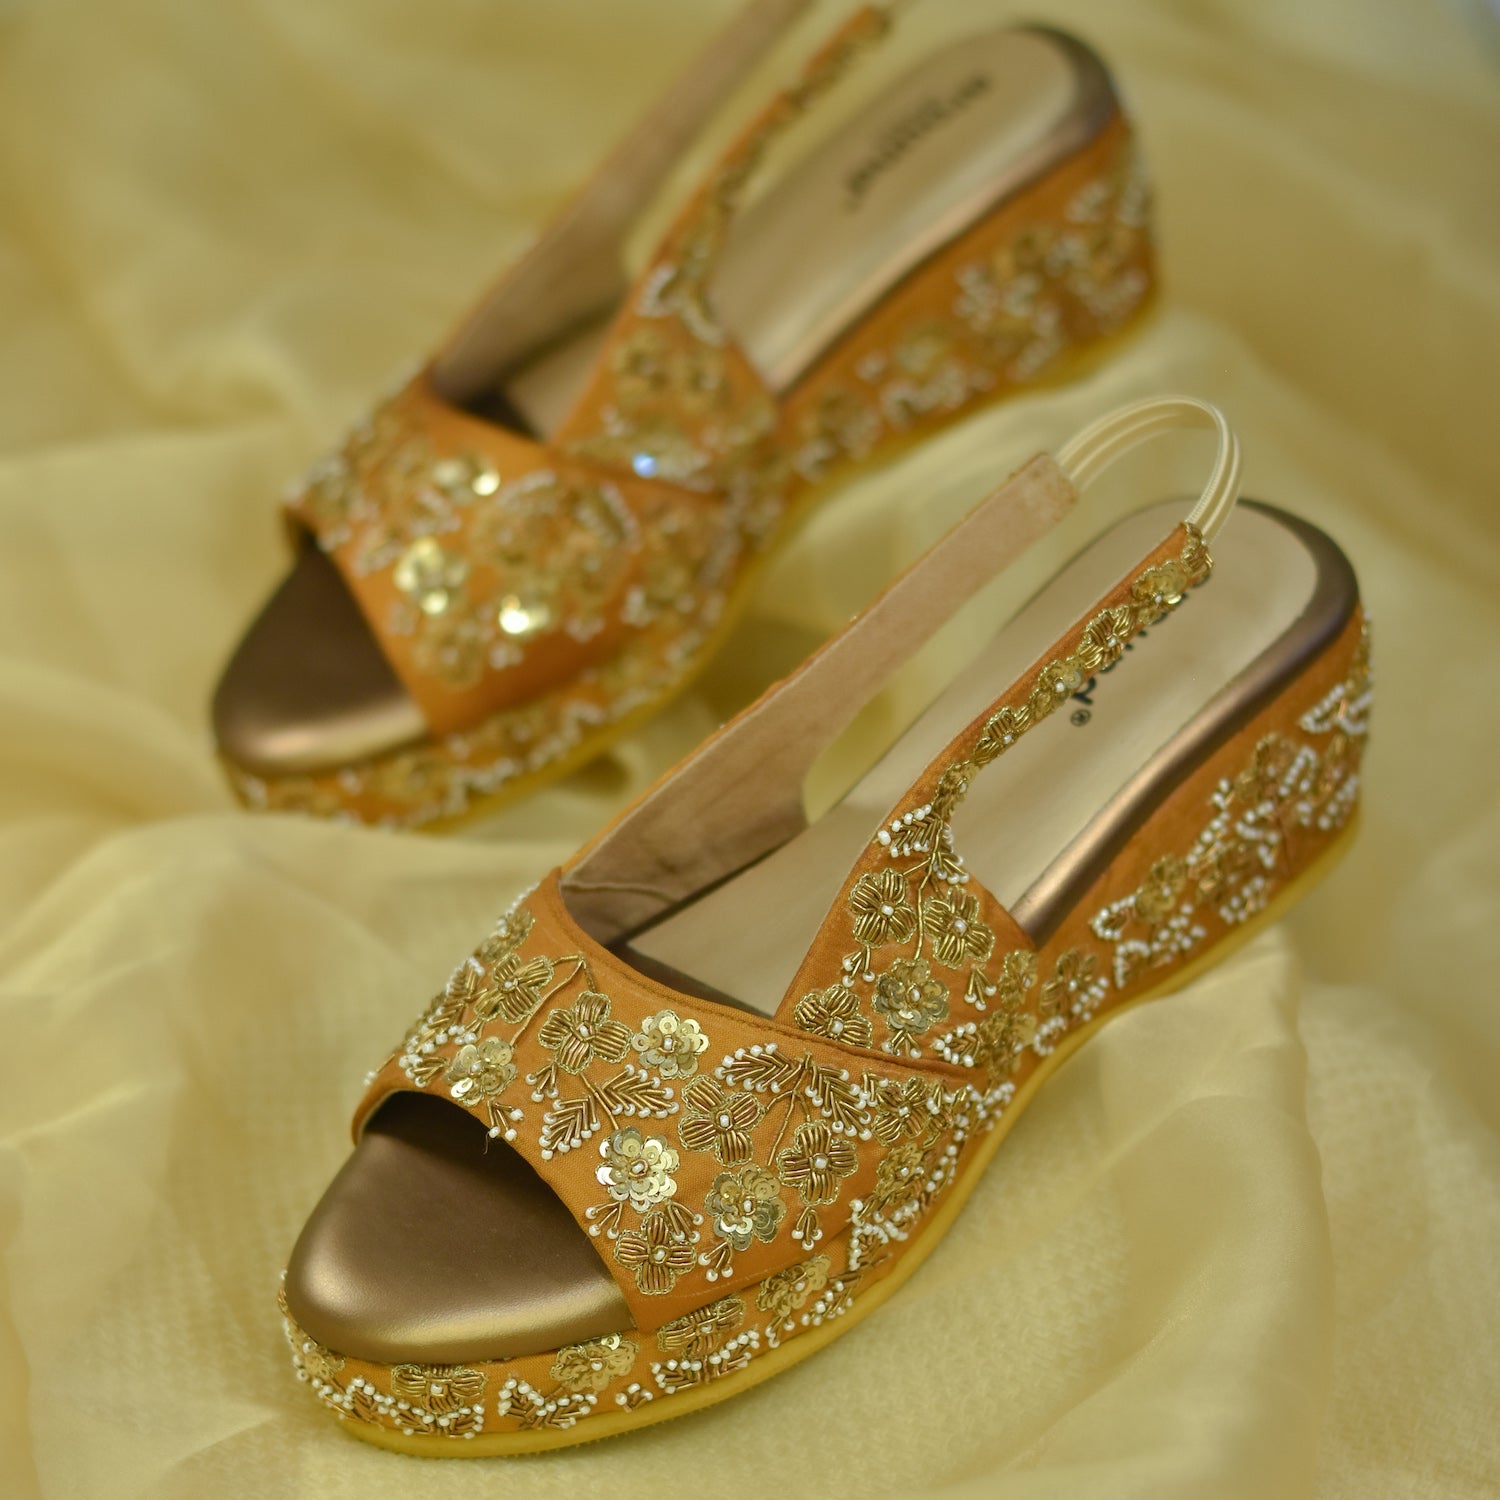 Premium stylish wedges with hand embroidery for brides worldwide